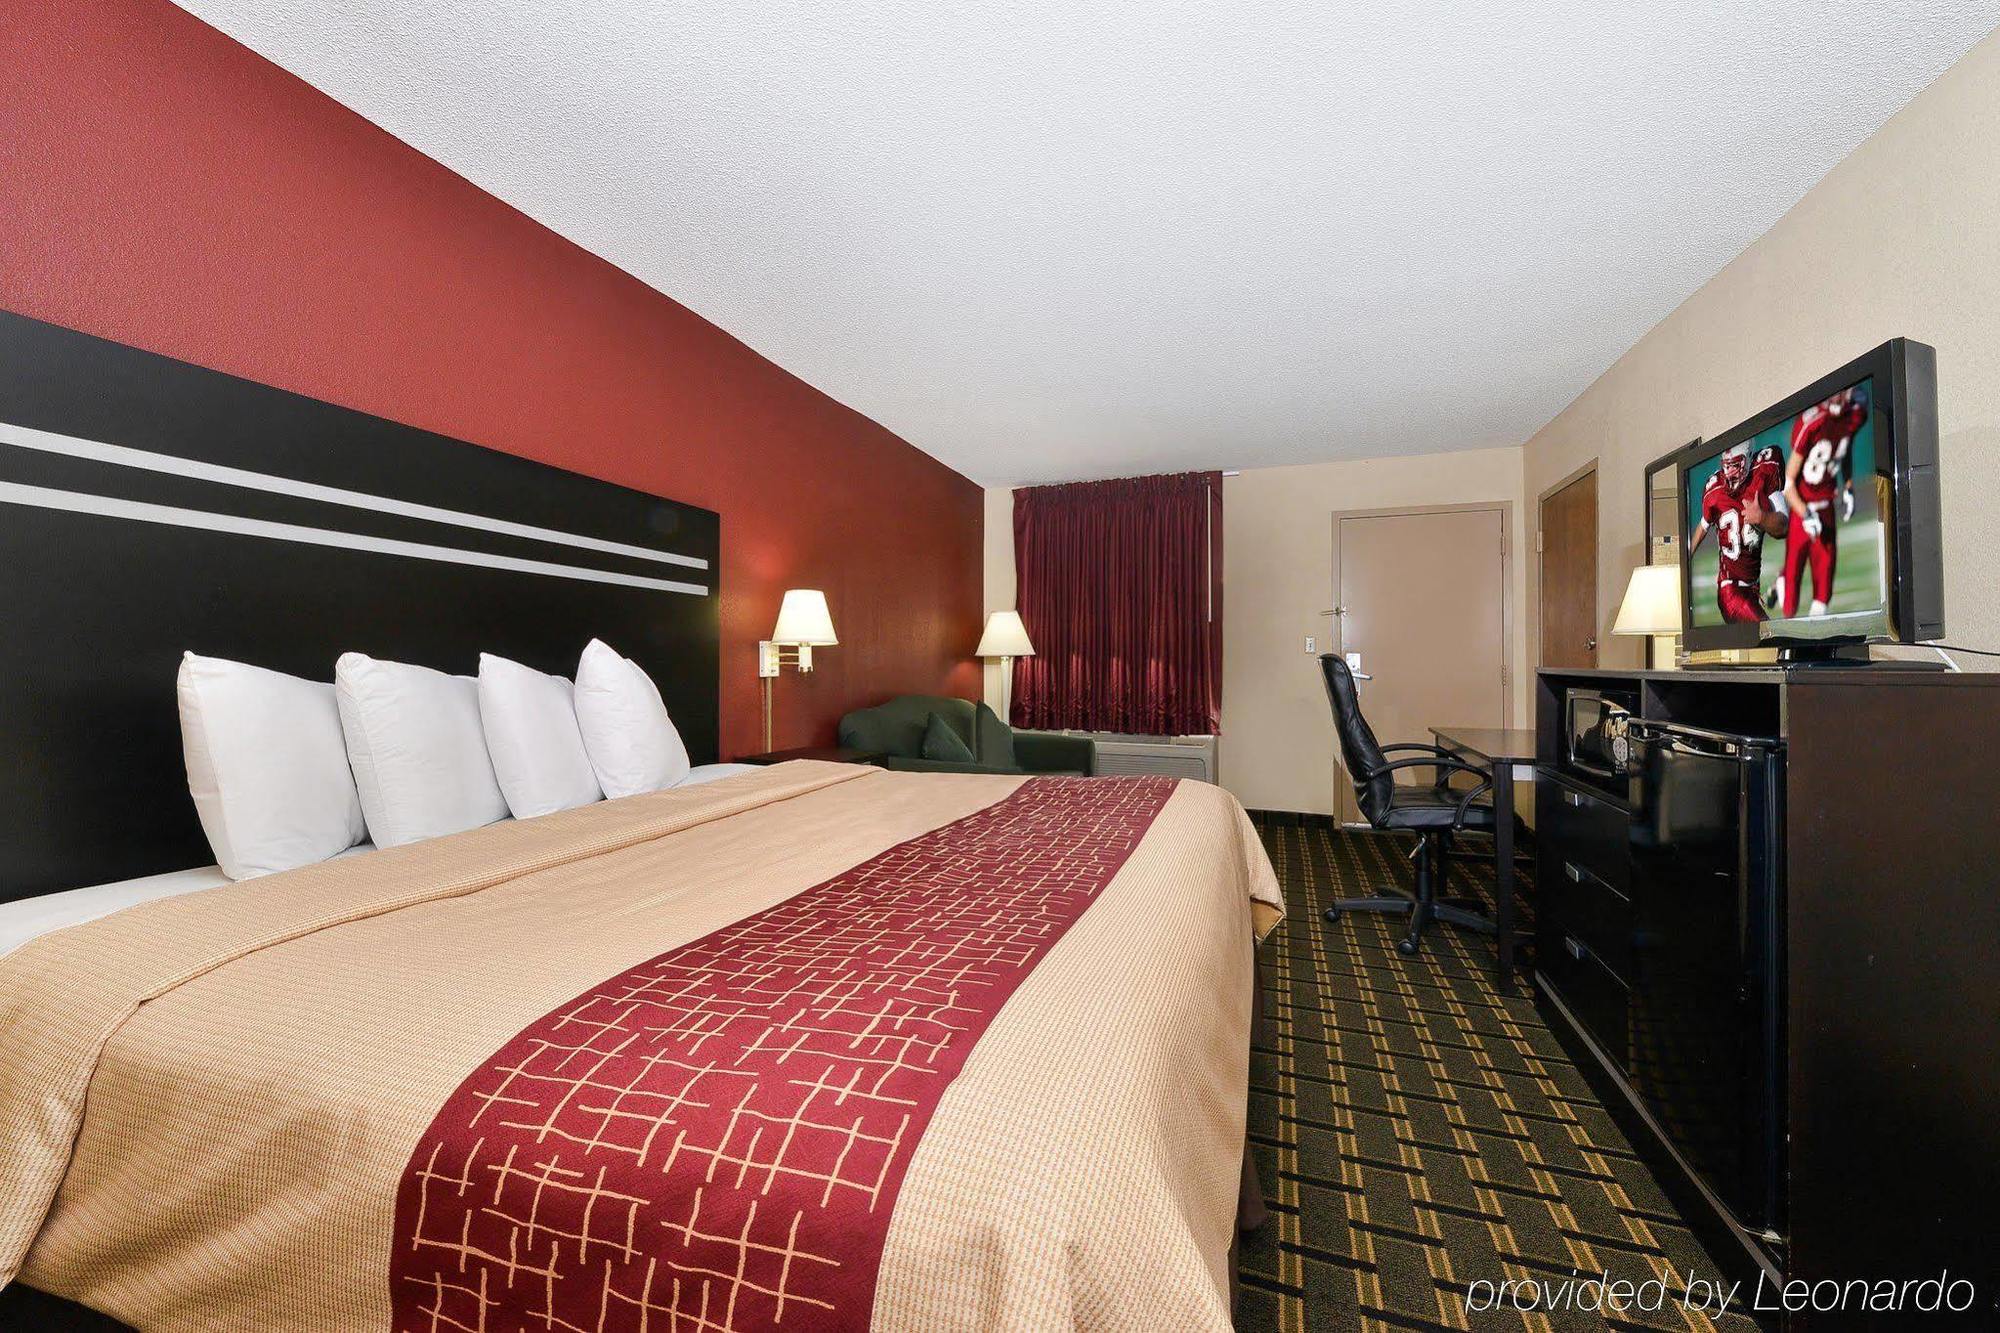 Red Roof Inn Cartersville-Emerson-Lakepoint North Экстерьер фото